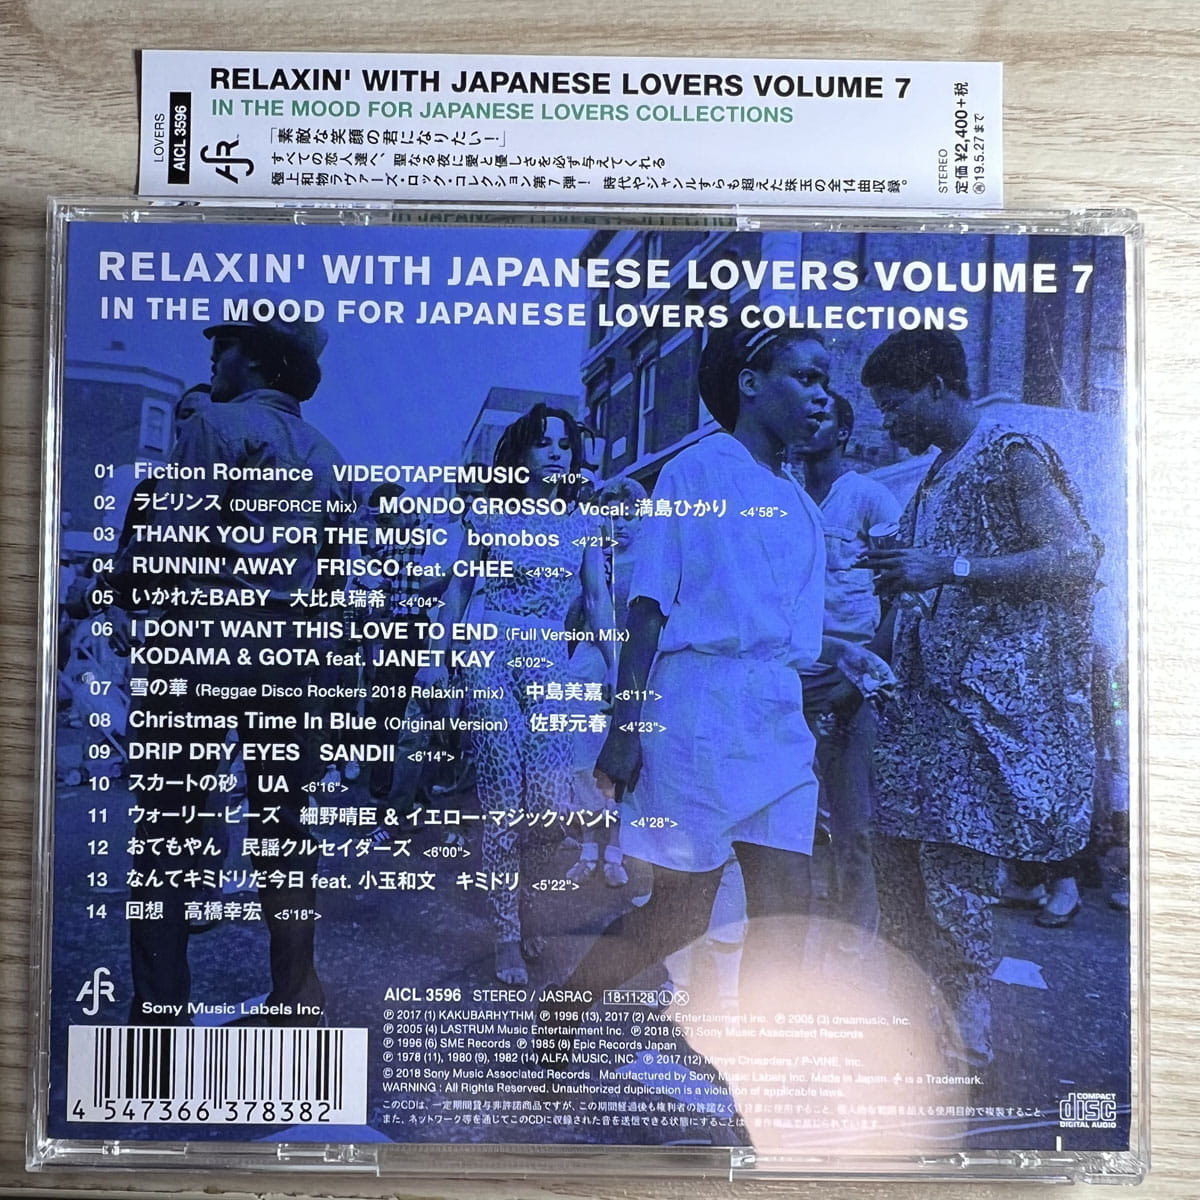 [CD] VA / RELAXIN' WITH JAPANESE LOVERS VOL. 7